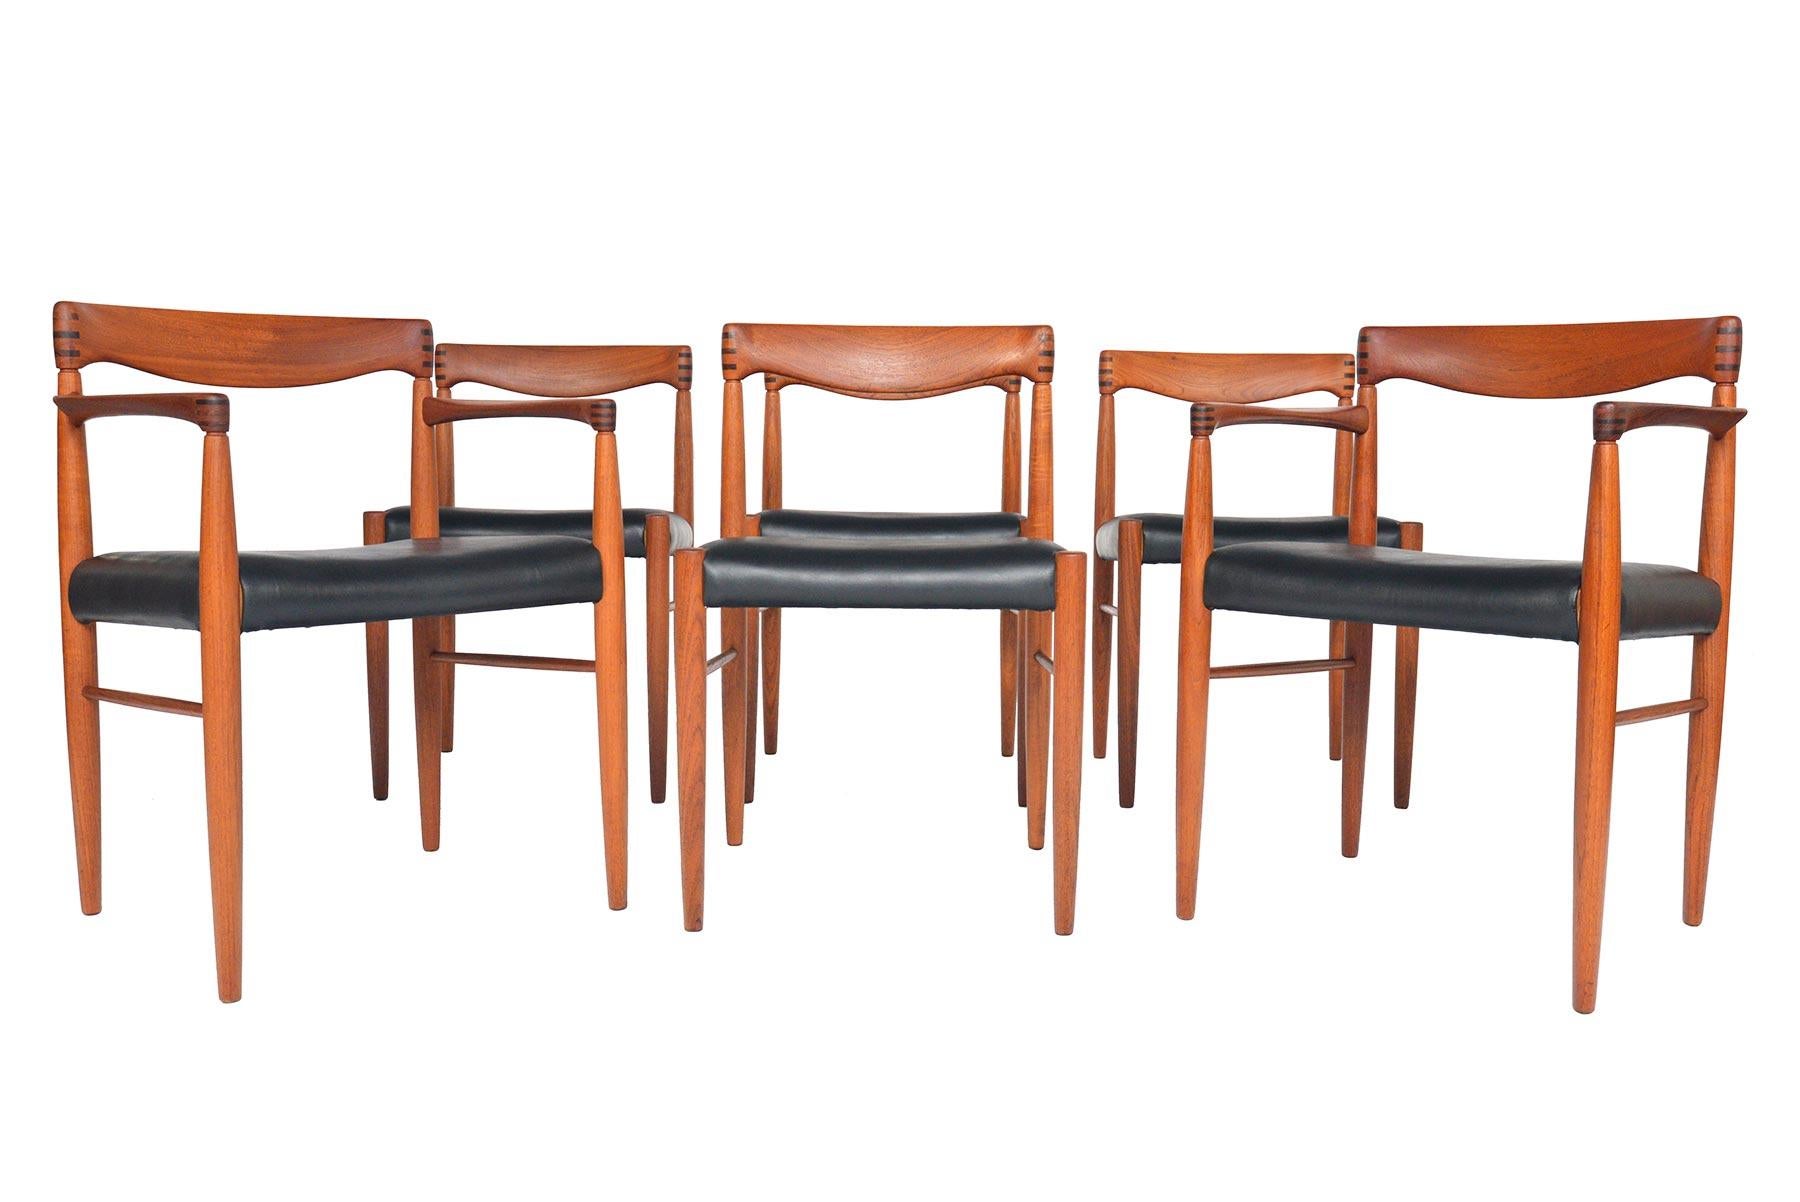 Sculpted to perfection, this set of six Danish modern teak and rosewood dining chairs was designed by H.W. Klein for Bramin in the 1960s. This original set includes two armed captain’s chairs and four side chairs. Bent teak backrests are adorned